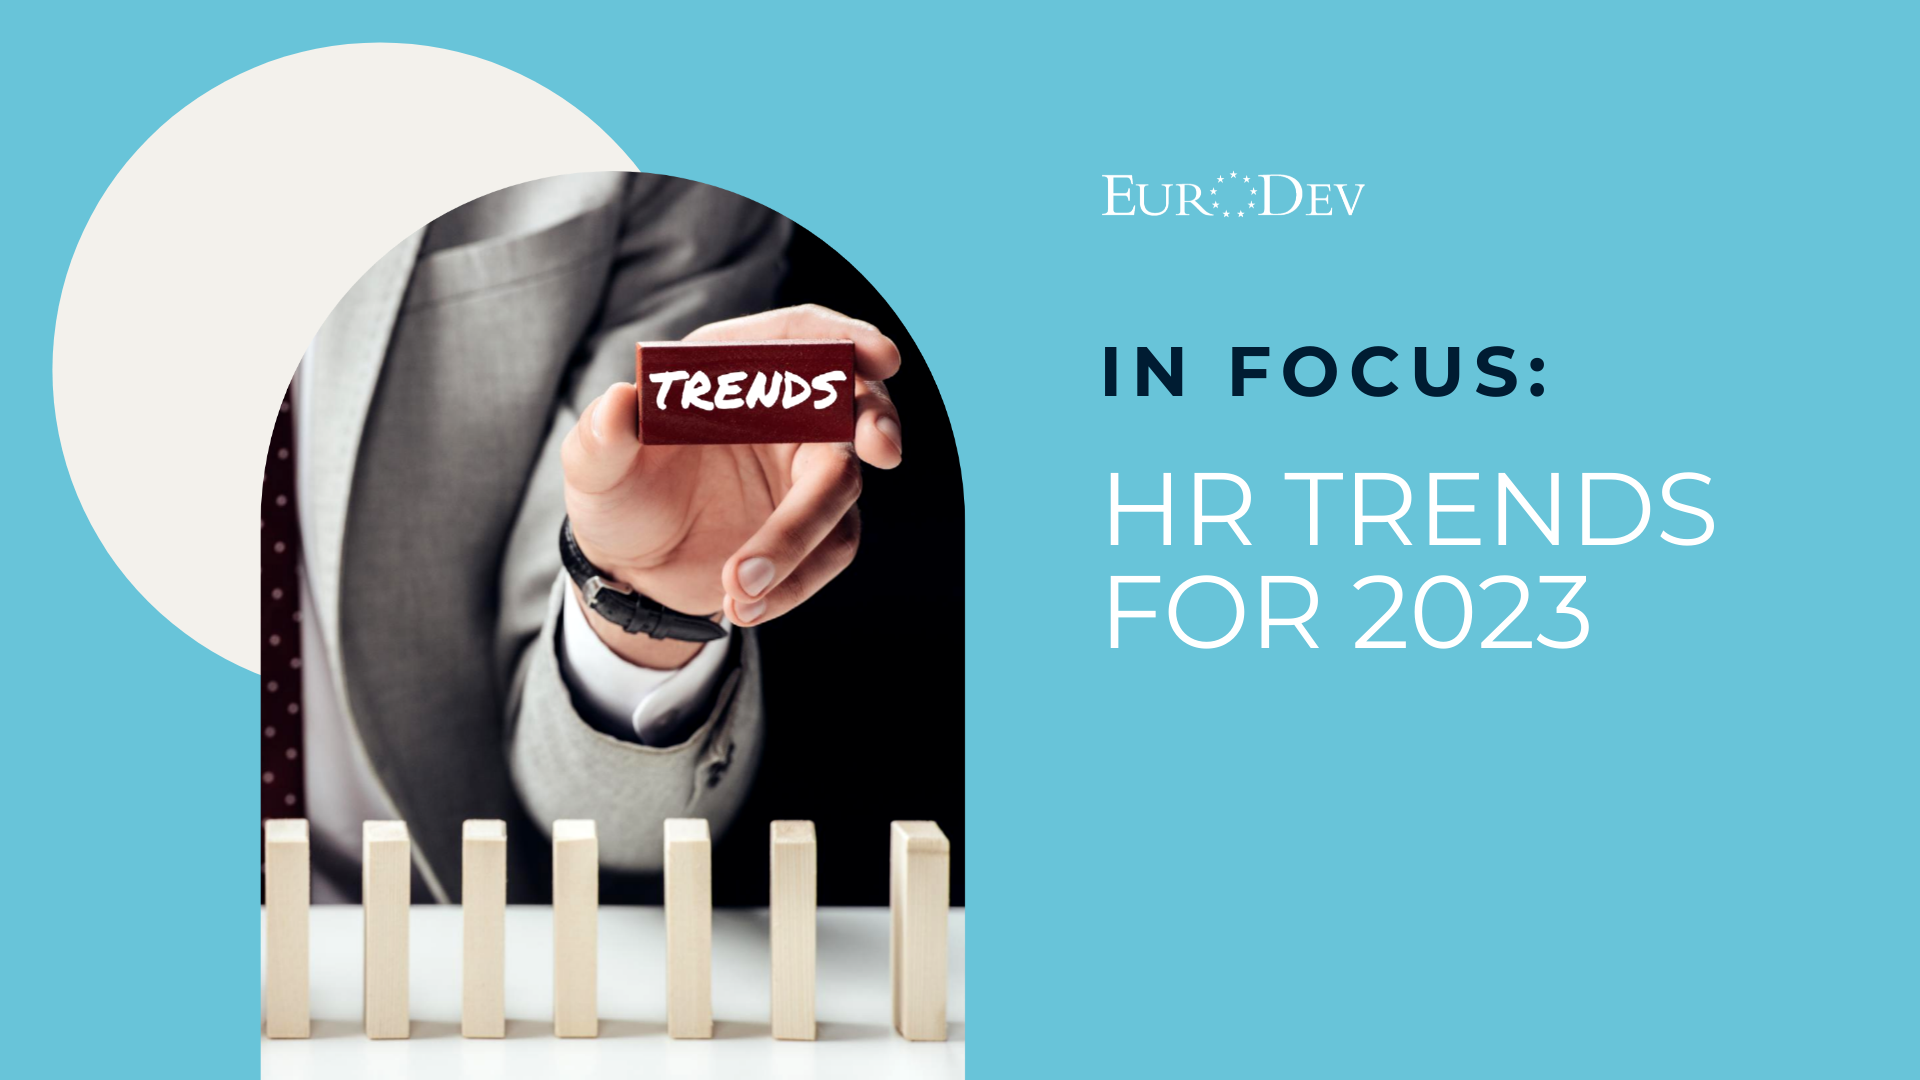 HR Trends for 2023